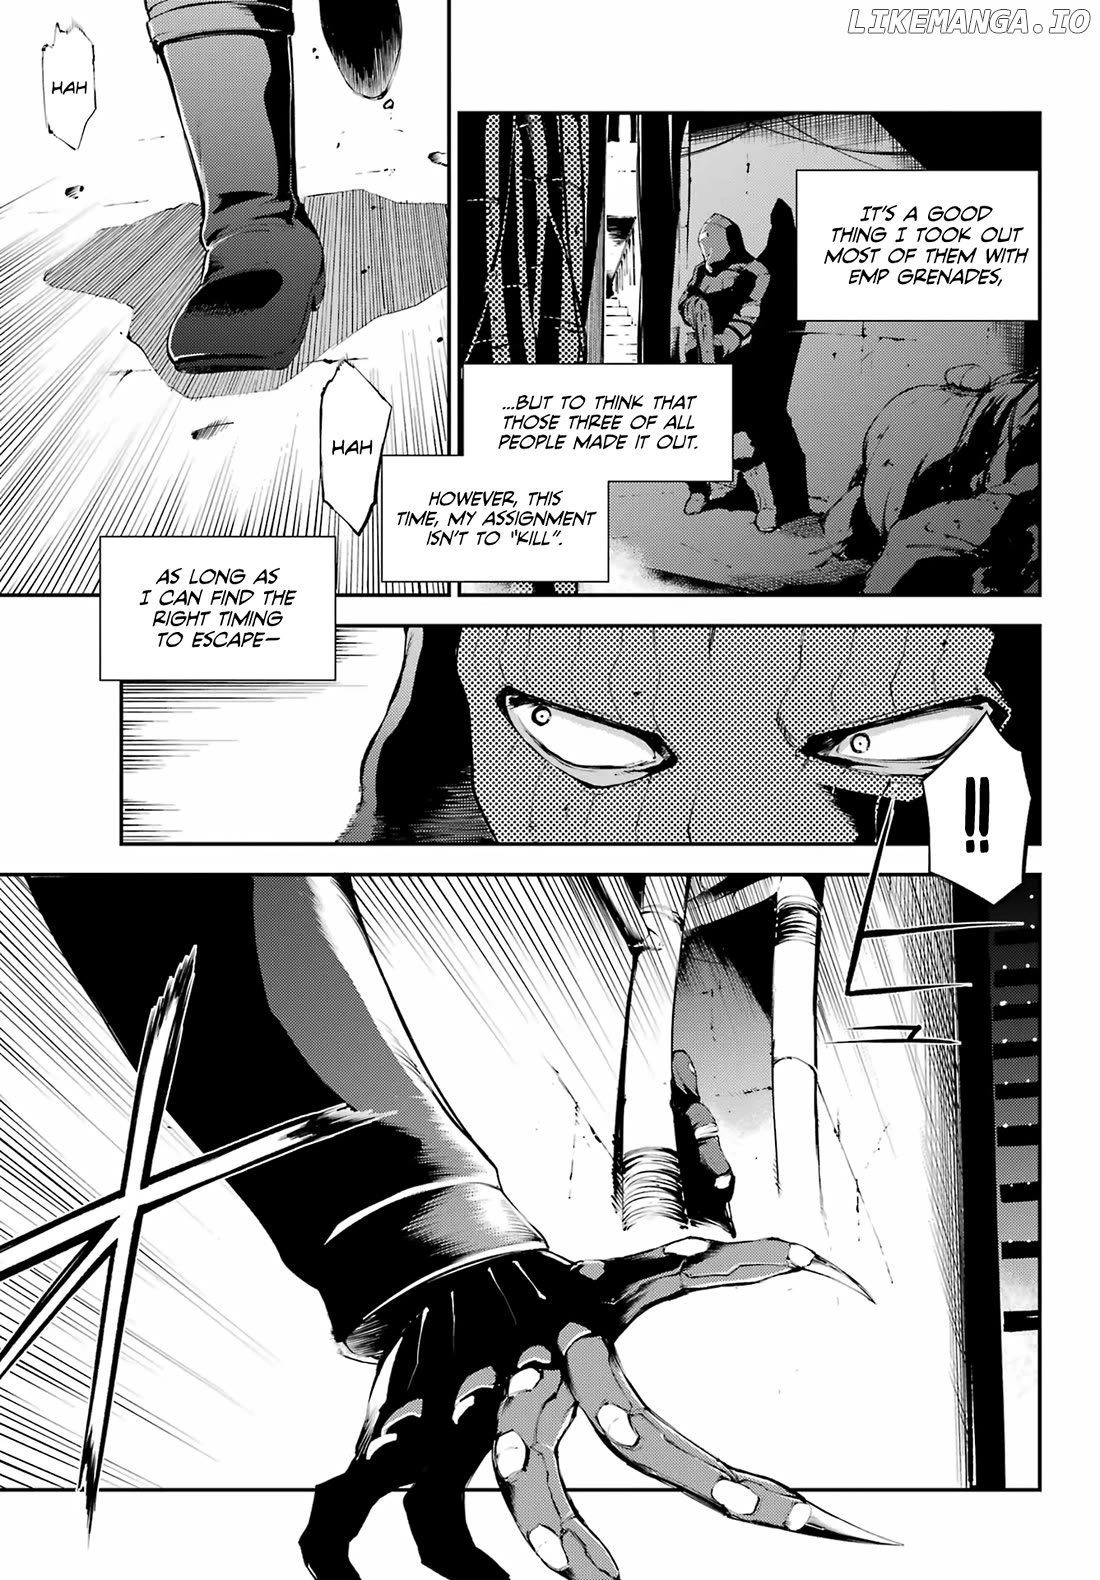 Moscow 2160 Chapter 12 - page 4